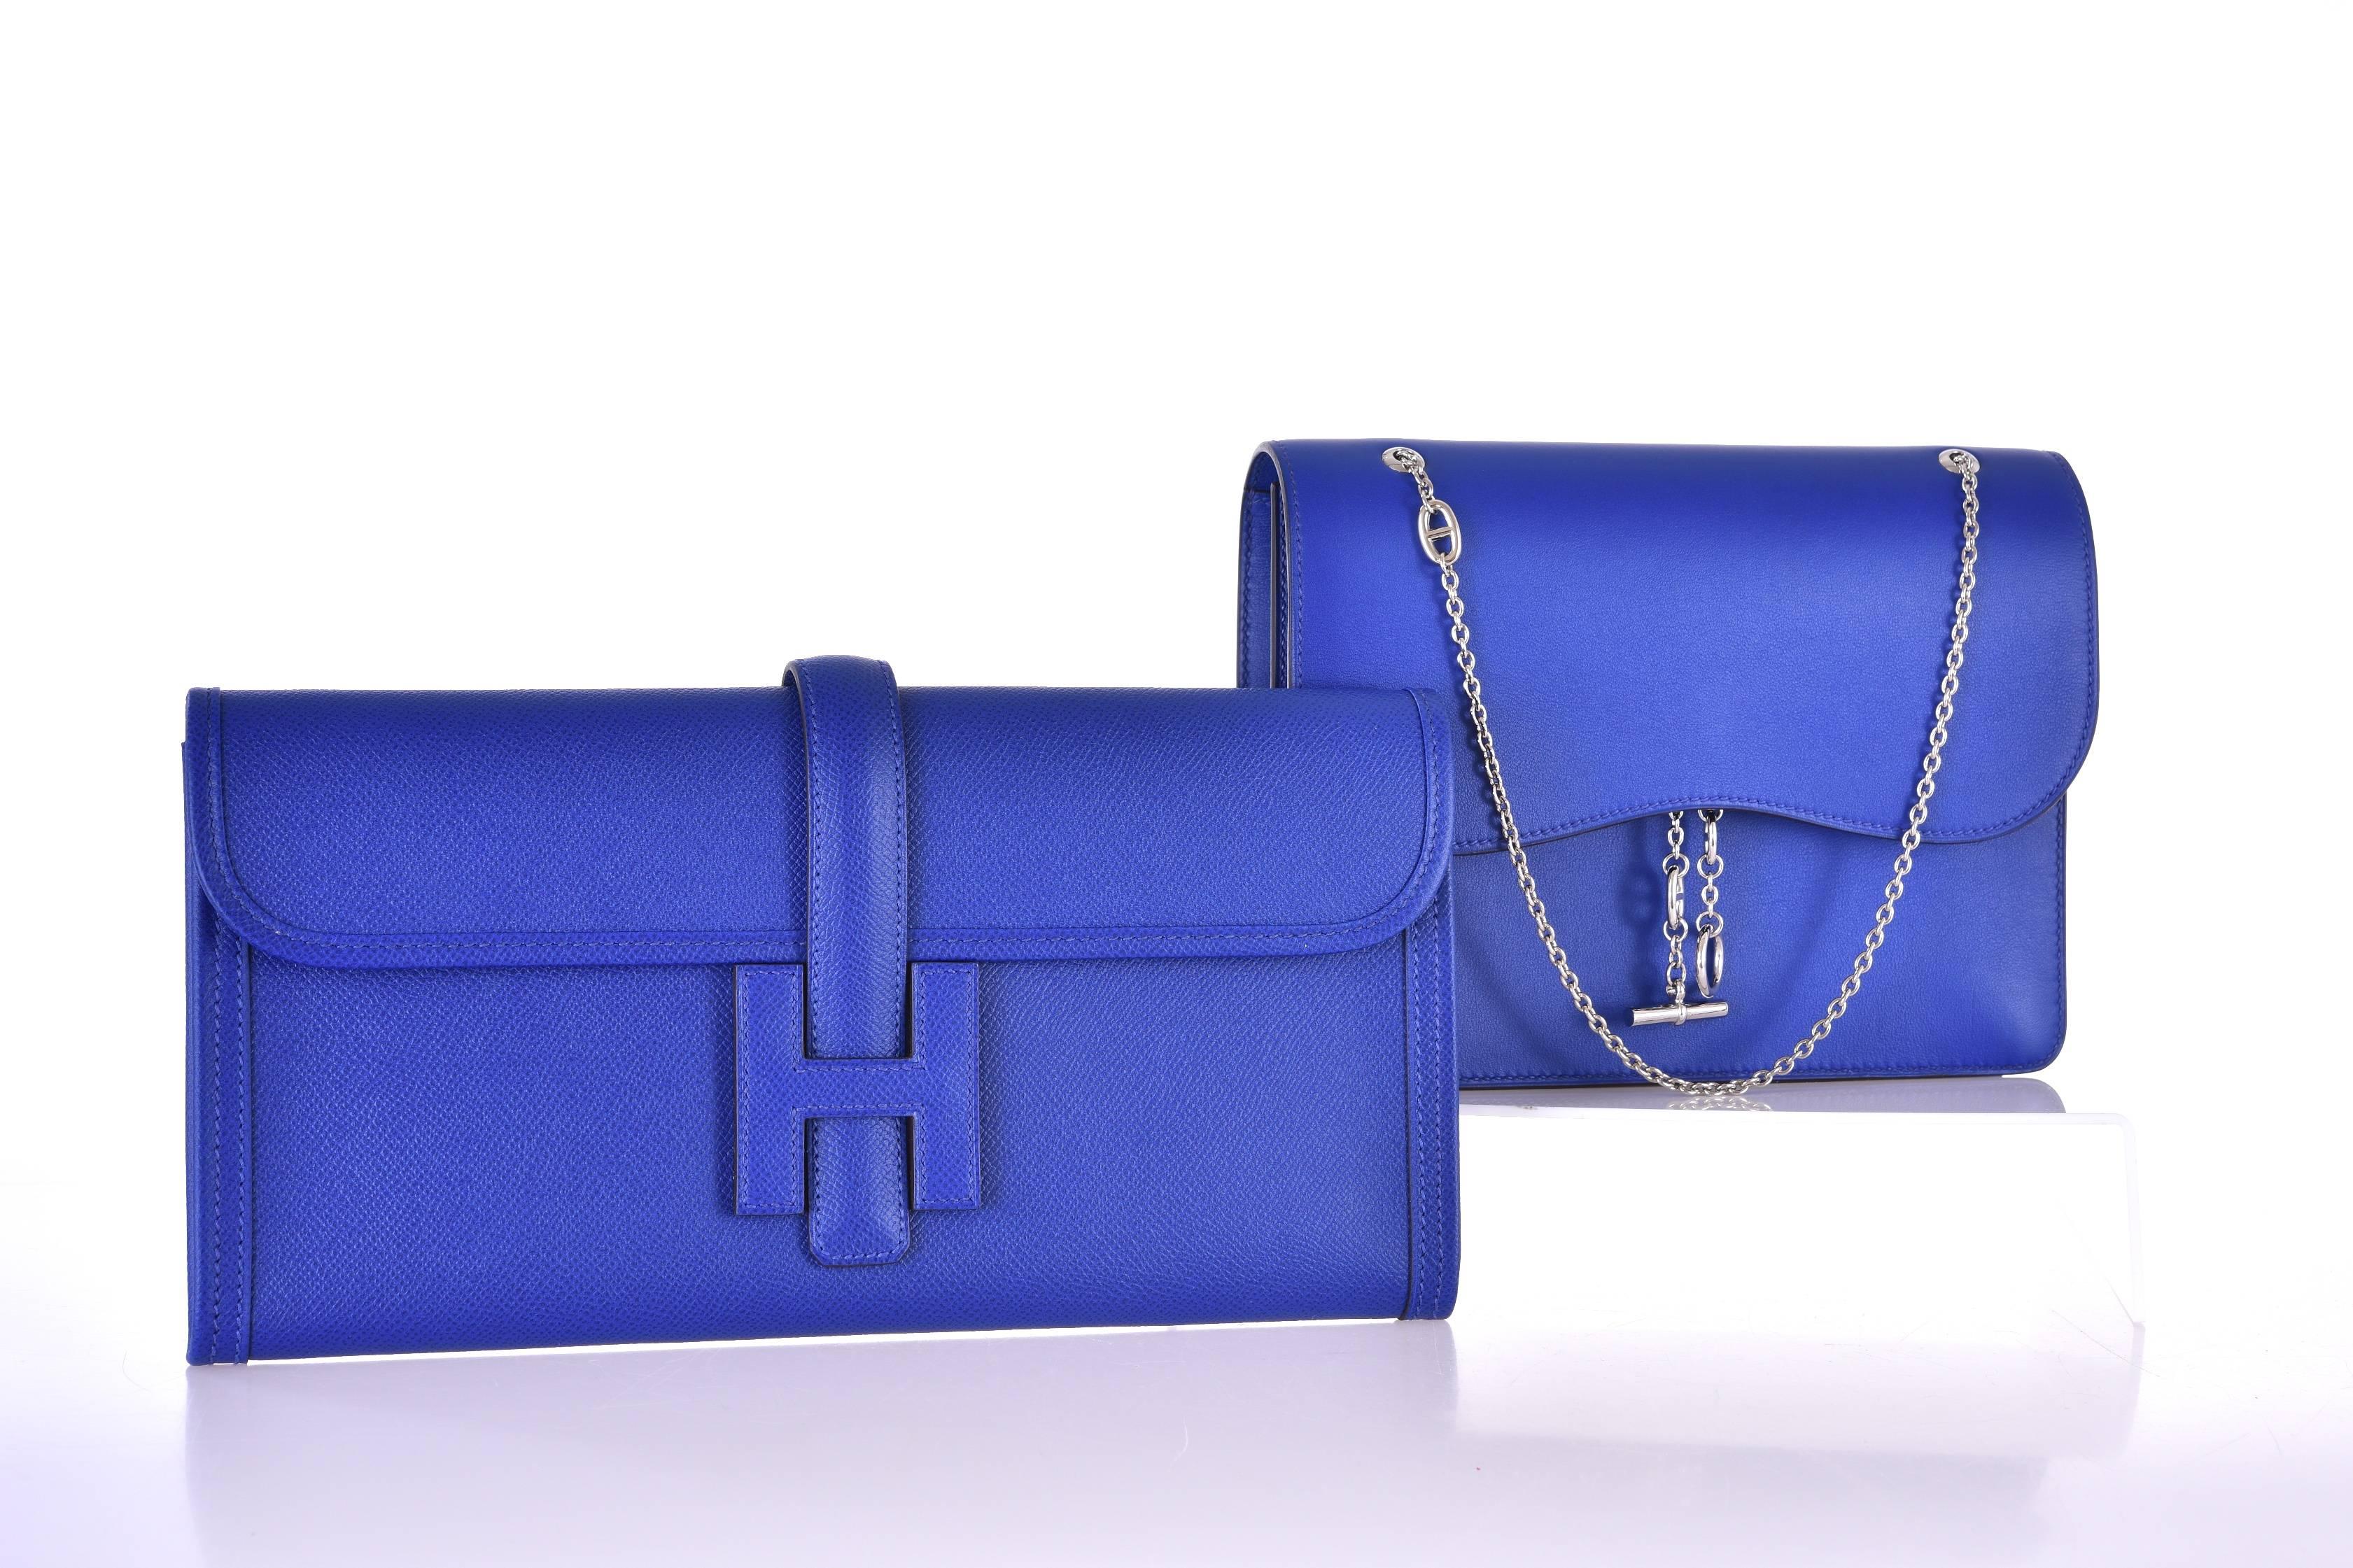 Hermes Catenina Bag Clutch Blue Electric Gorgeous New Bag! JaneFinds 5